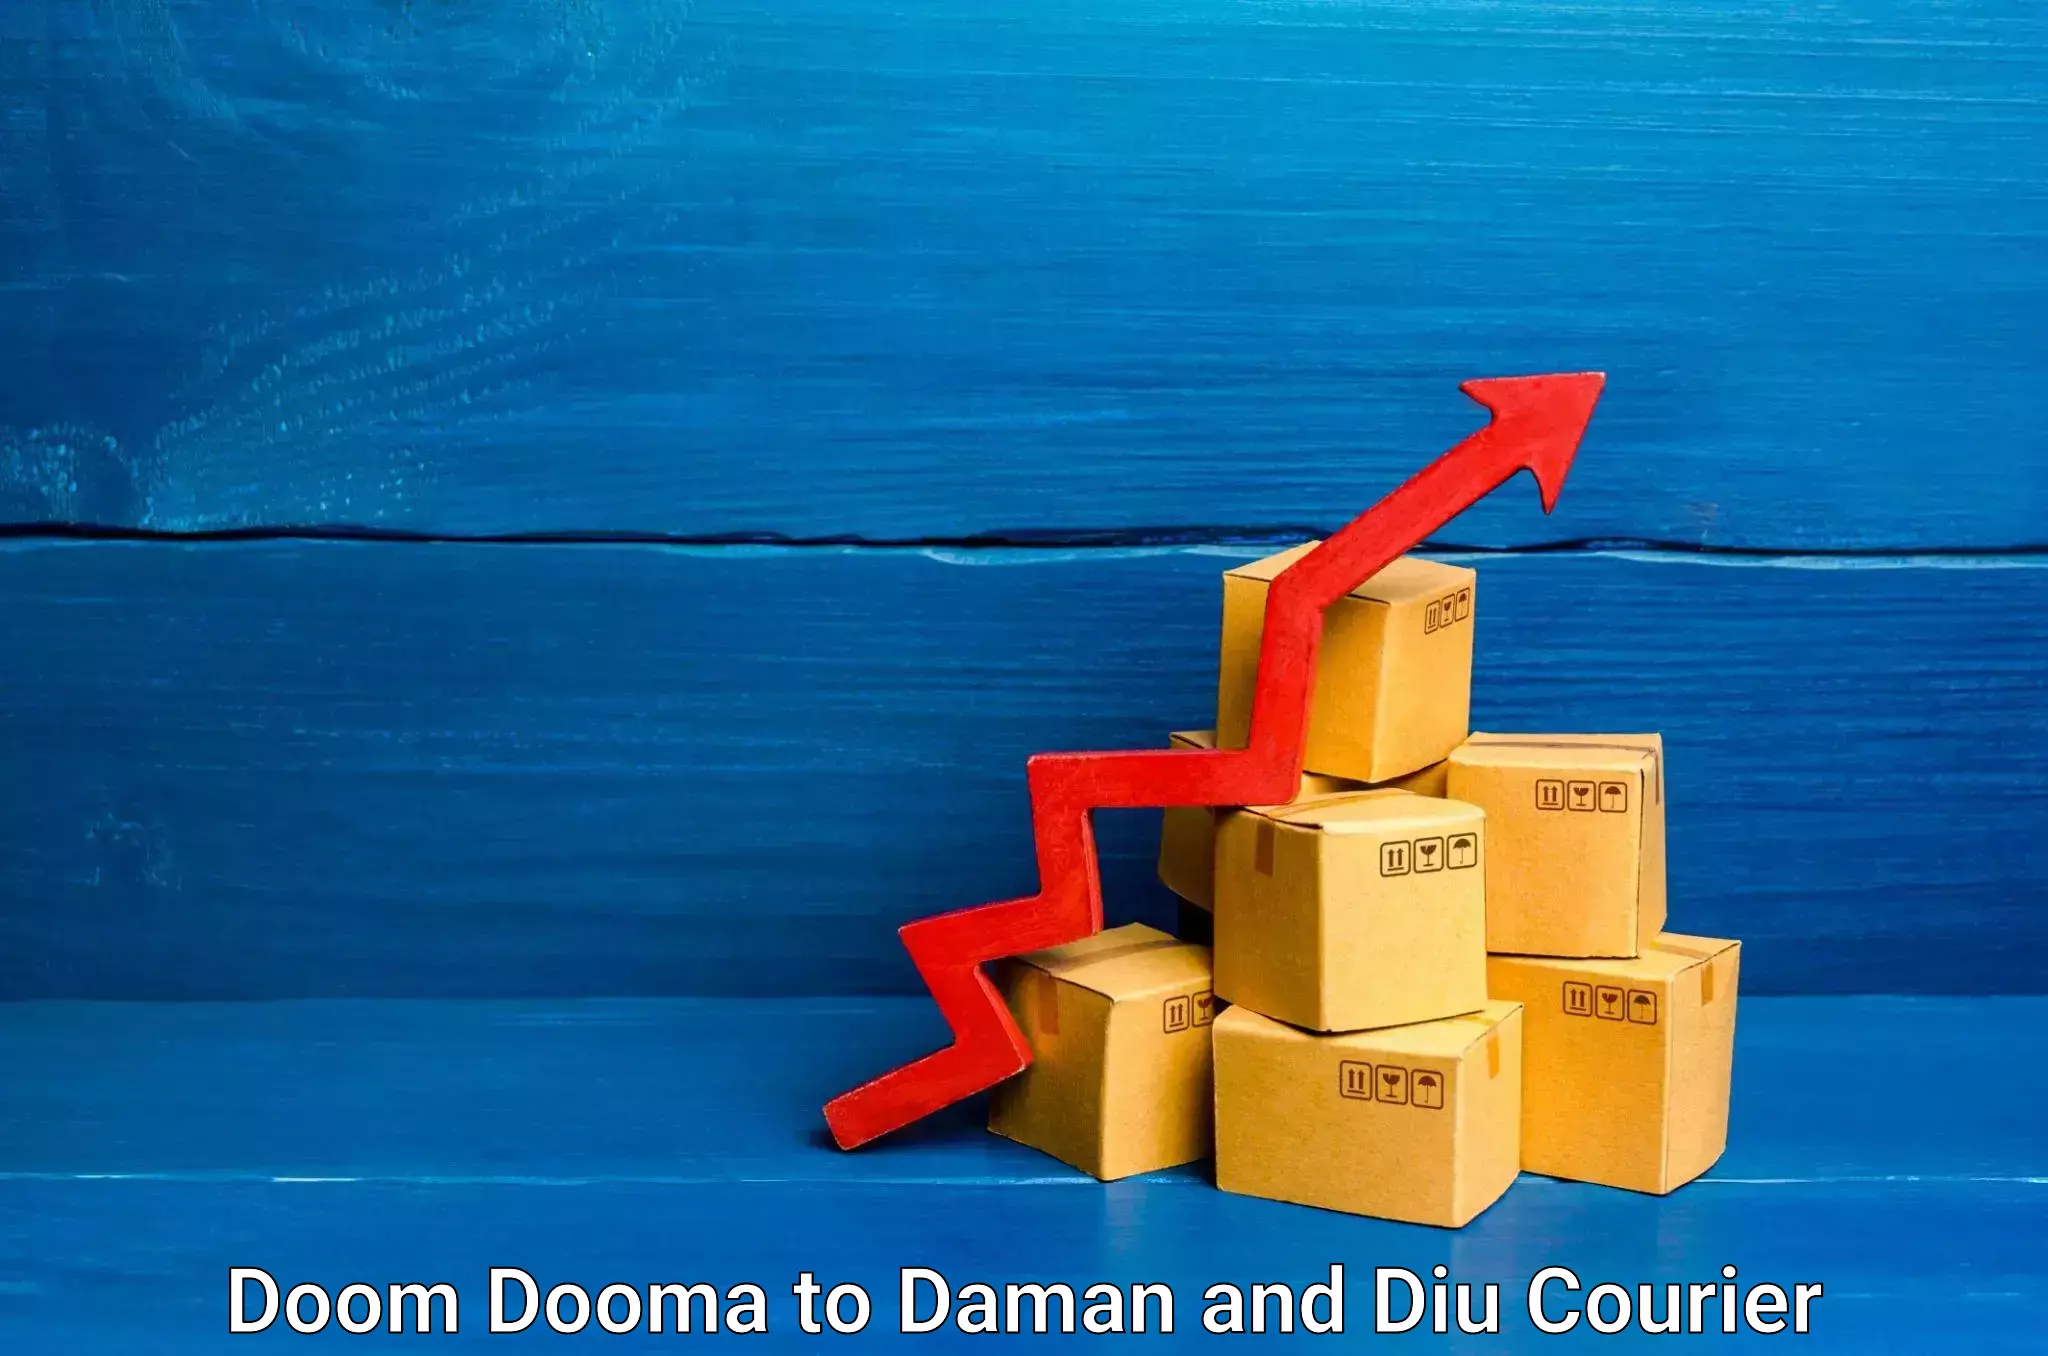 Courier service comparison Doom Dooma to Daman and Diu